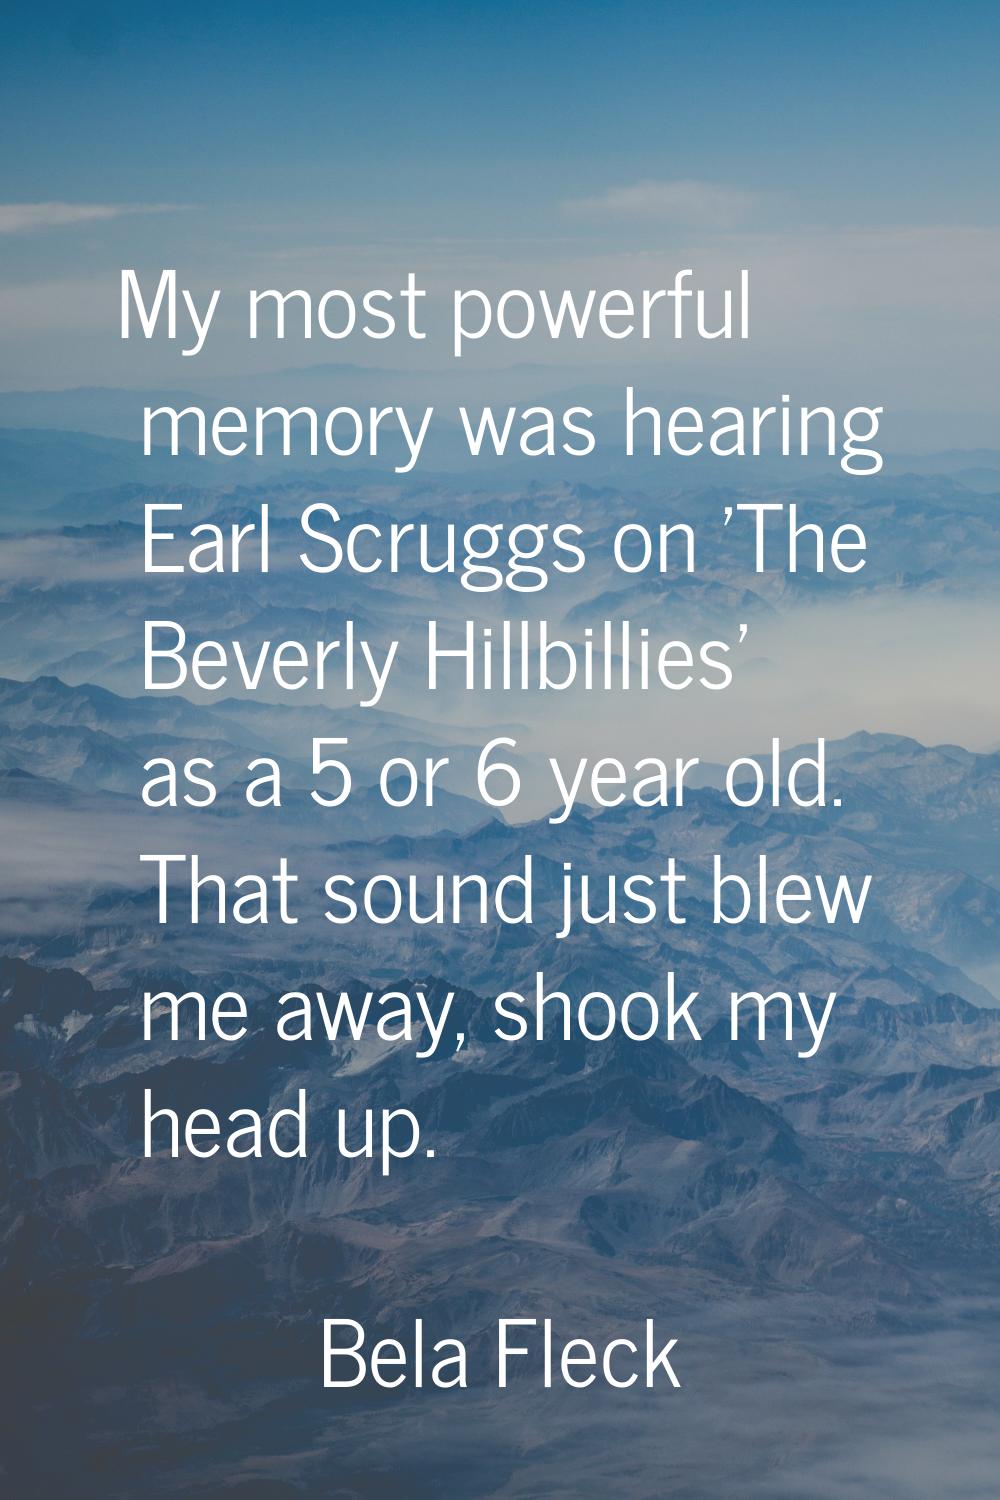 My most powerful memory was hearing Earl Scruggs on 'The Beverly Hillbillies' as a 5 or 6 year old.